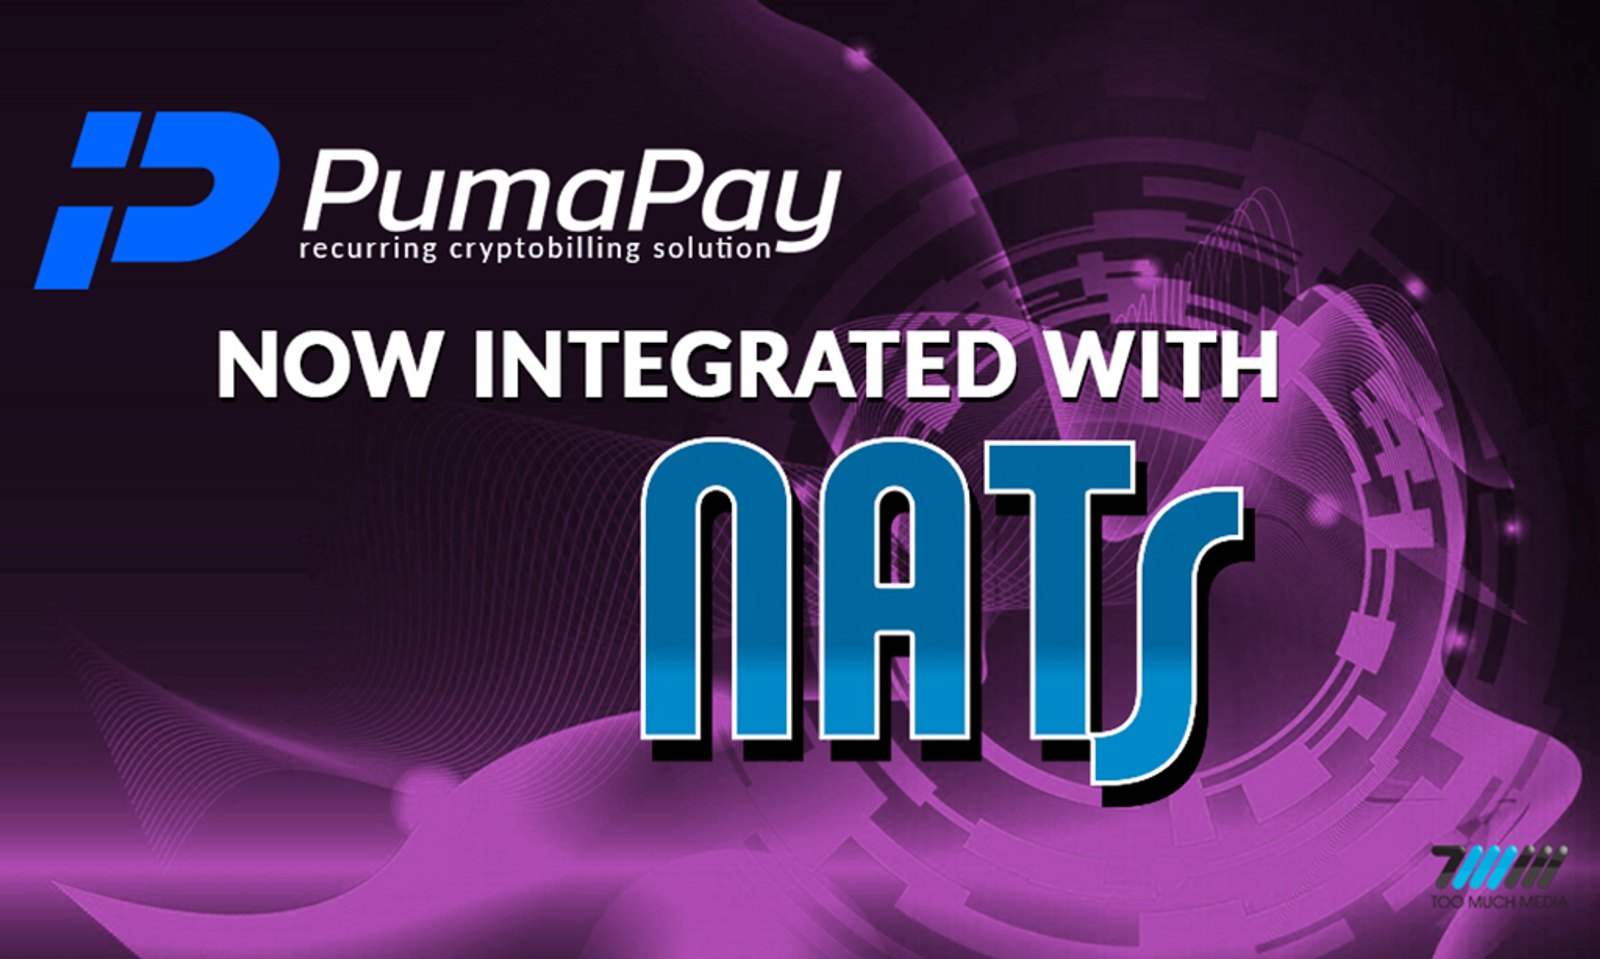 NATS Integrates PumaPay for Recurring Crypto Payments